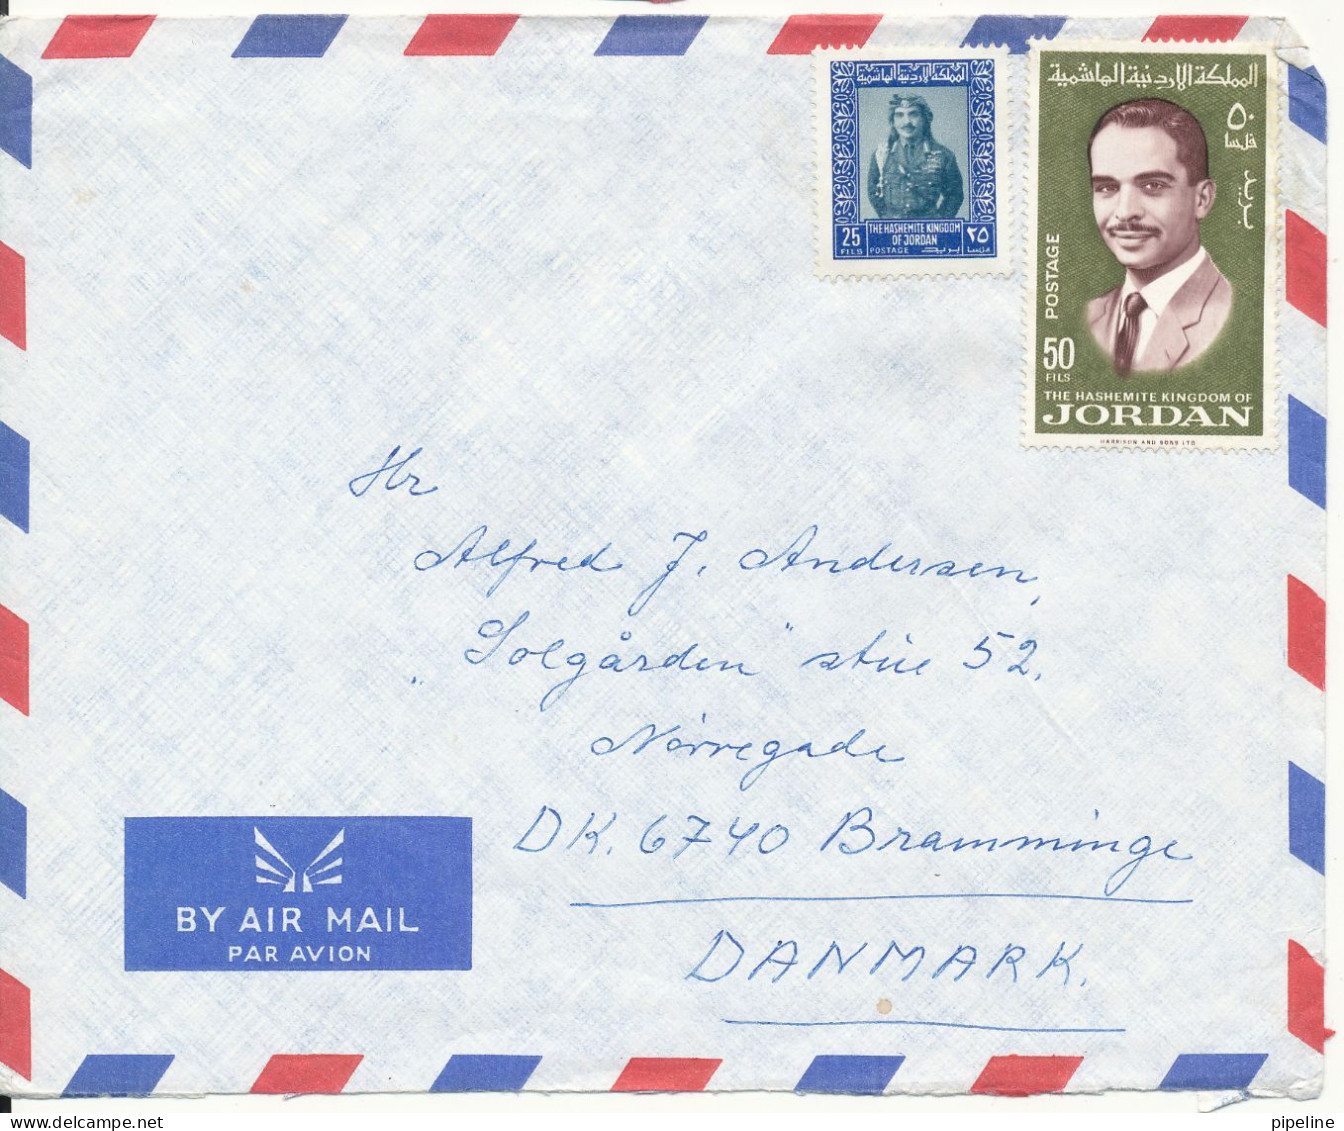 Jordan Air Mail Cover Sent To Denmark 1977 ? No Postmark On The Stamps (sent From UNRWA Temp H.Q.) - Jordan